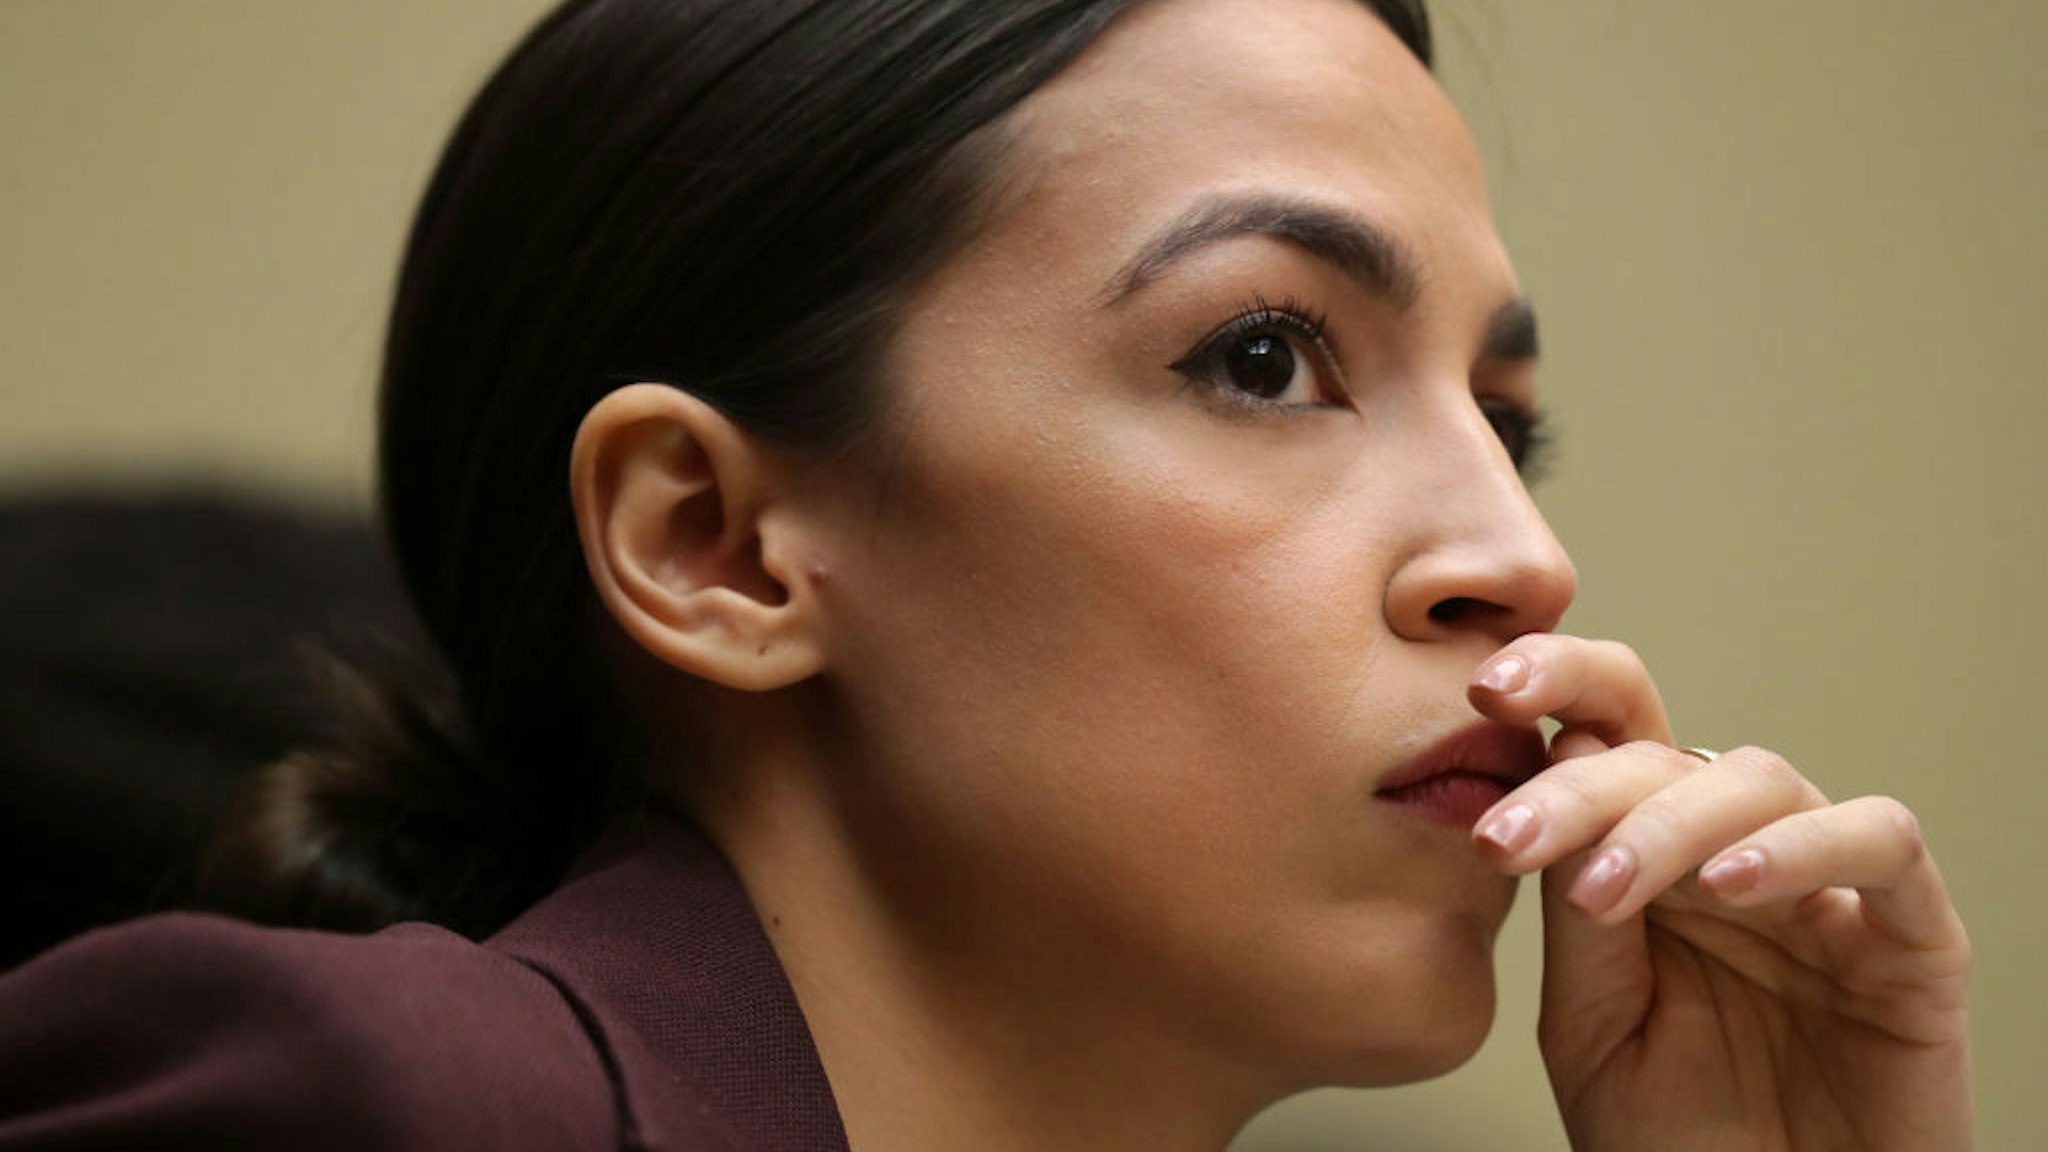 WASHINGTON, DC - FEBRUARY 27: Rep. Alexandria Ocasio-Cortez (D-NY) listens to testimony by Michael Cohen, former attorney and fixer for President Donald Trump, before the House Oversight Committee on Capitol Hill February 27, 2019 in Washington, DC. Last year Cohen was sentenced to three years in prison and ordered to pay a $50,000 fine for tax evasion, making false statements to a financial institution, unlawful excessive campaign contributions and lying to Congress as part of special counsel Robert Mueller's investigation into Russian meddling in the 2016 presidential elections.